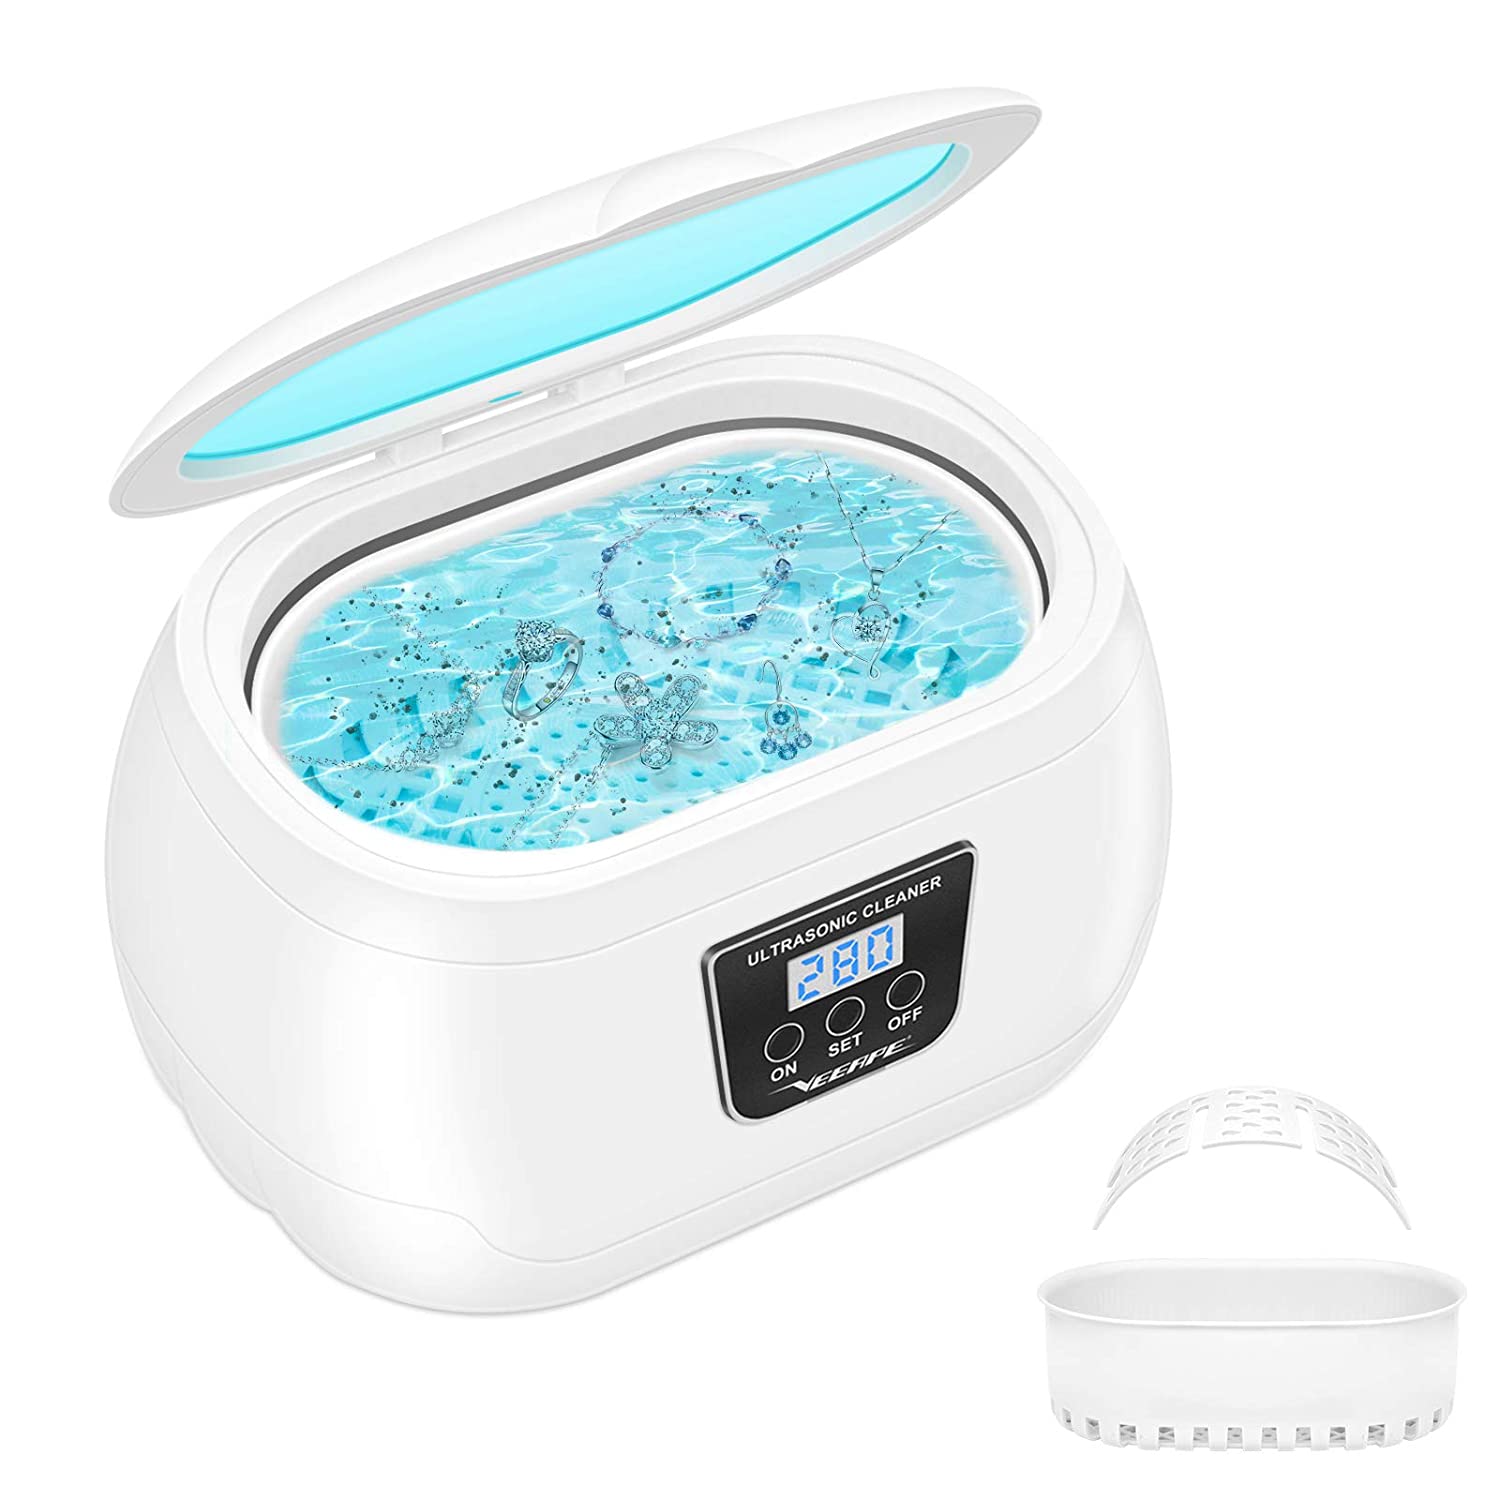 White ultrasonic cleaner with light-blue liquid in it